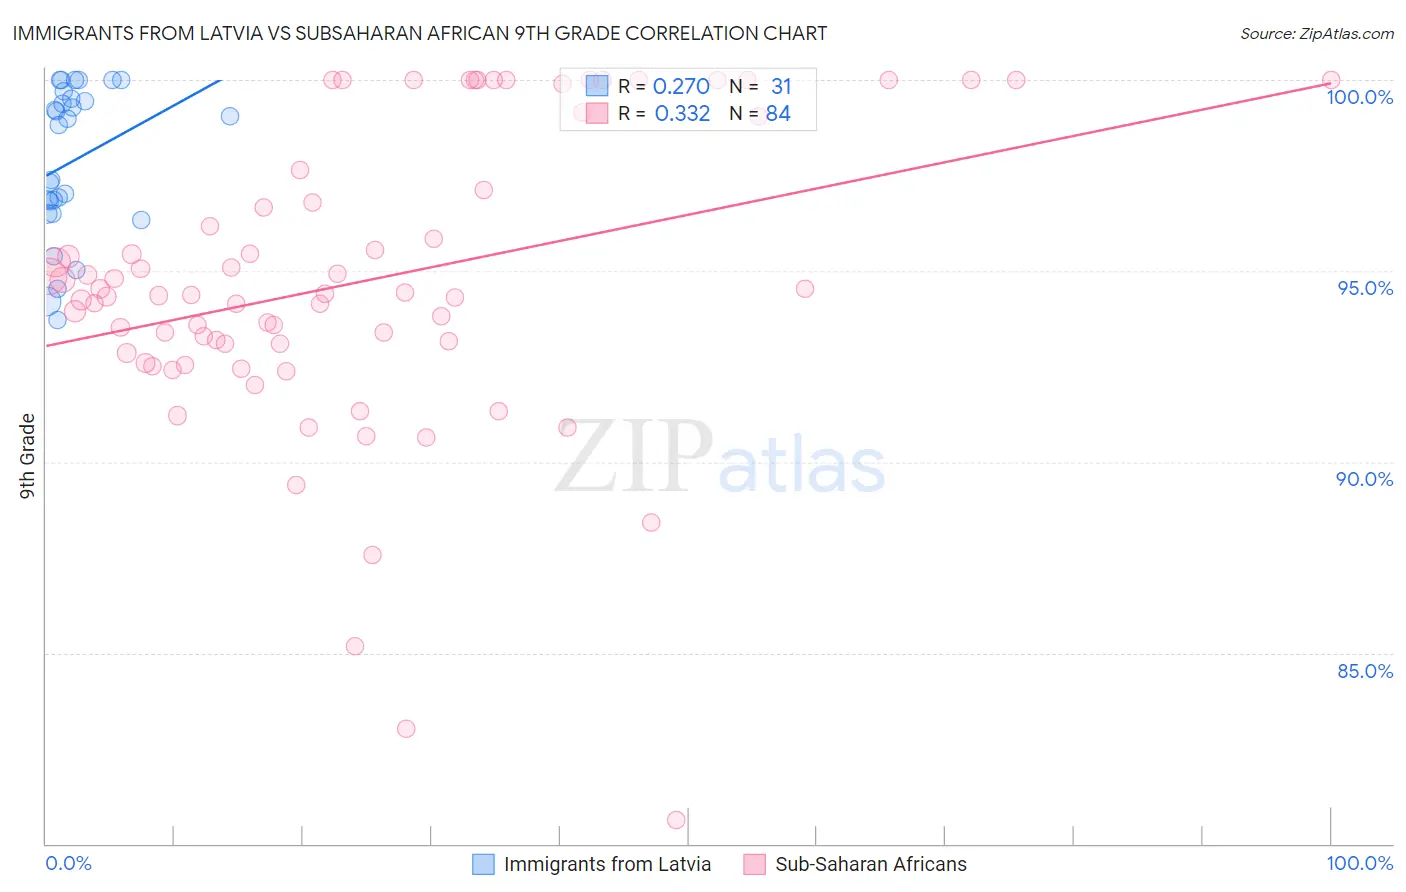 Immigrants from Latvia vs Subsaharan African 9th Grade